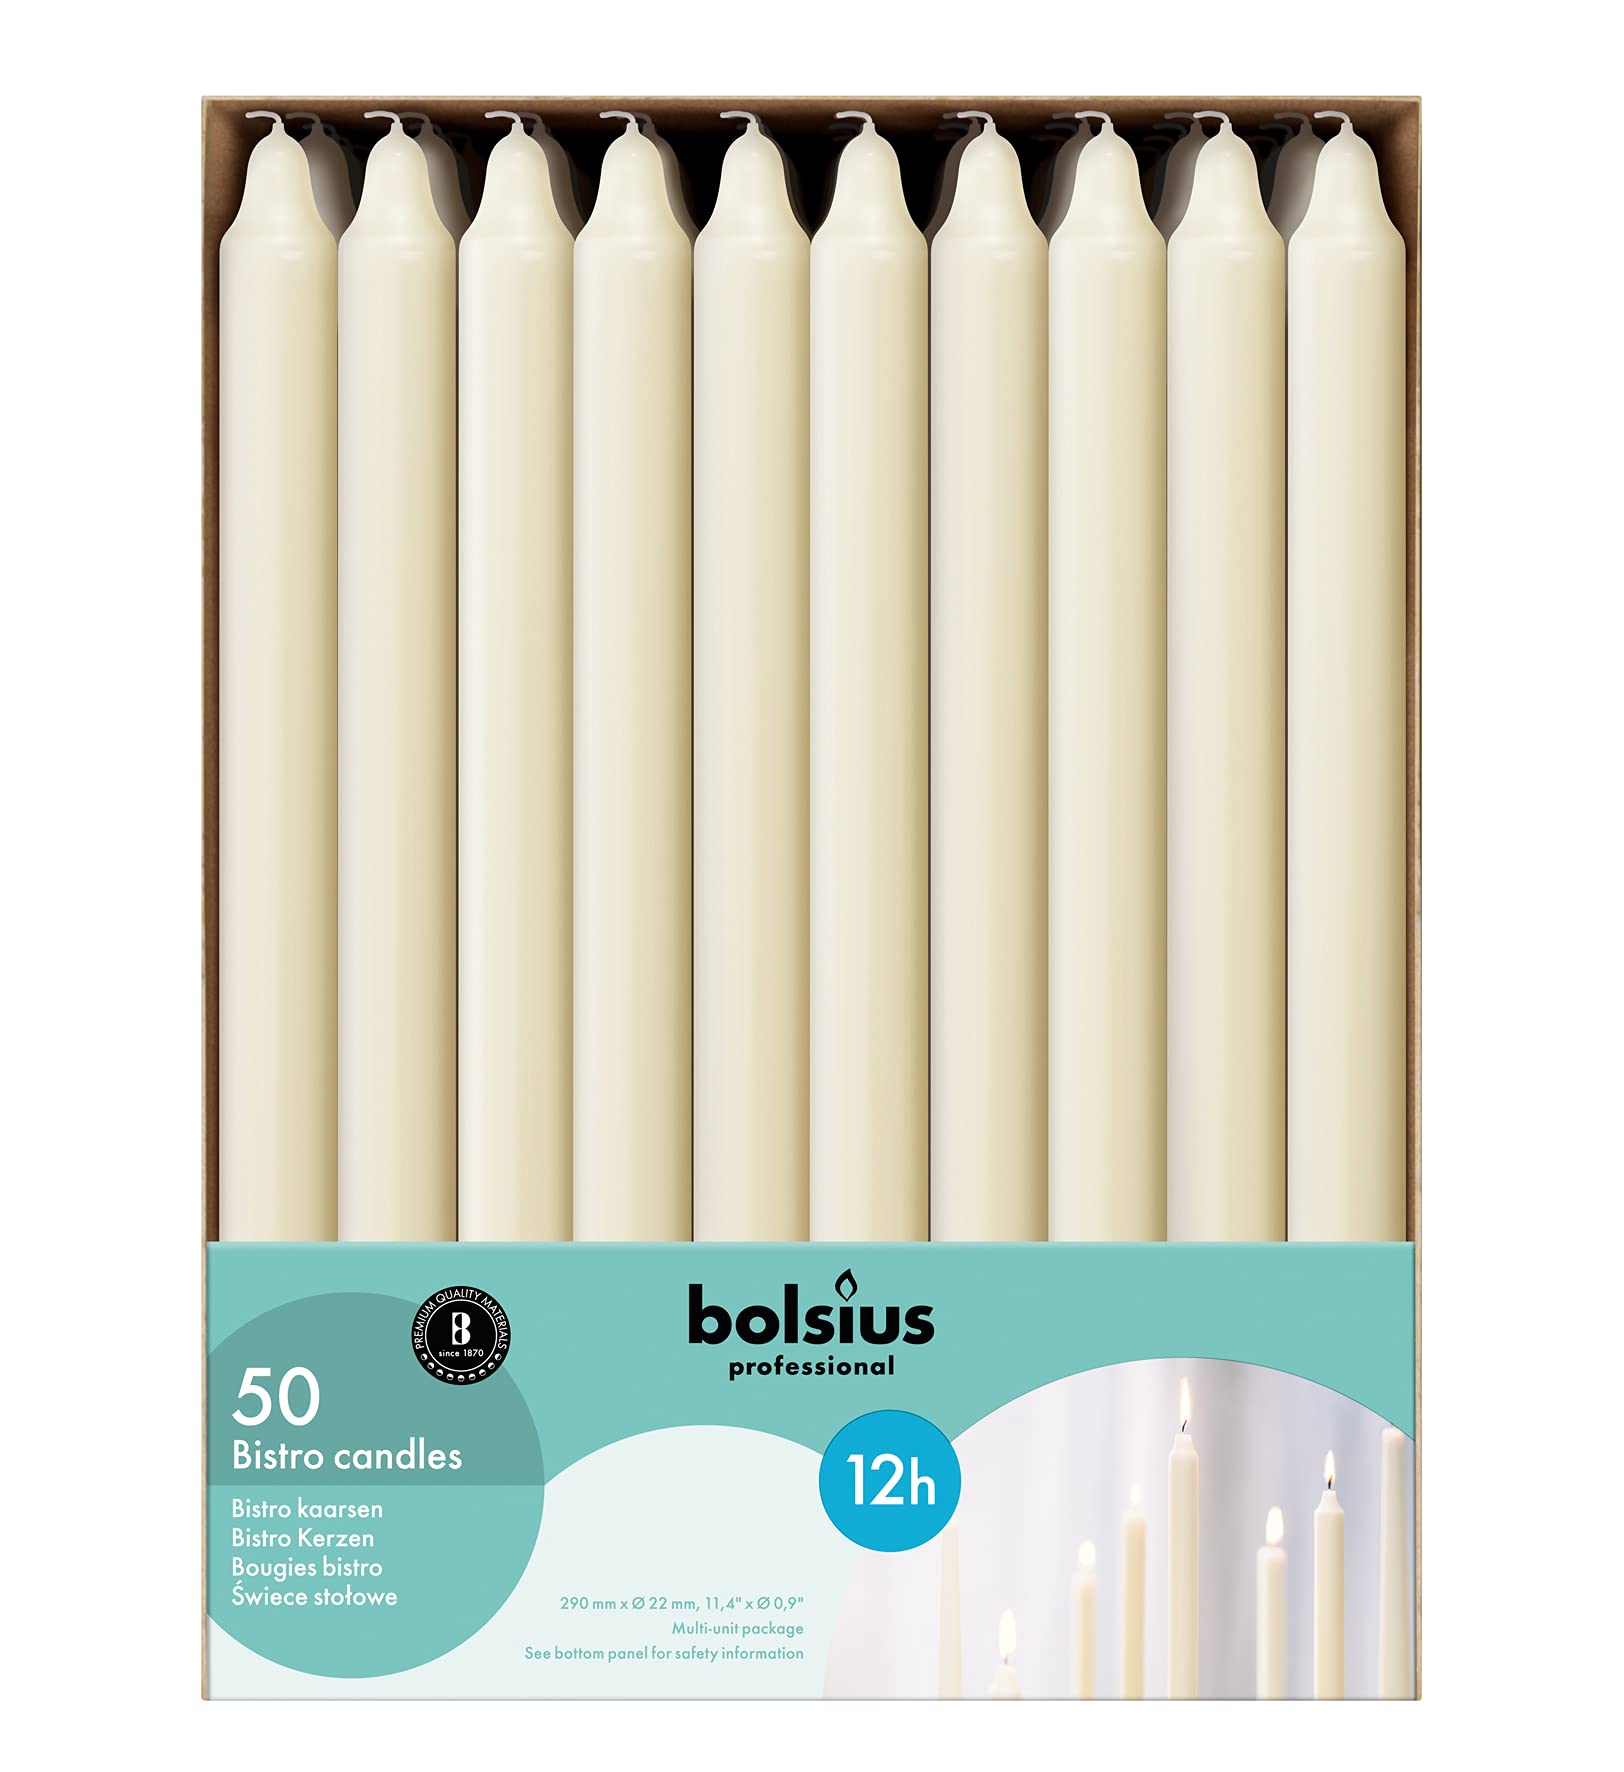 BOLSIUS Ivory Candlesticks Bulk Pack 50 Count - Unscented Dripless 11.5 Inch Household & Dinner Candle Set - 12+ Hours - Premium European Quality - Consistent Smokeless Flame - 100% Cotton Wick  - Like New